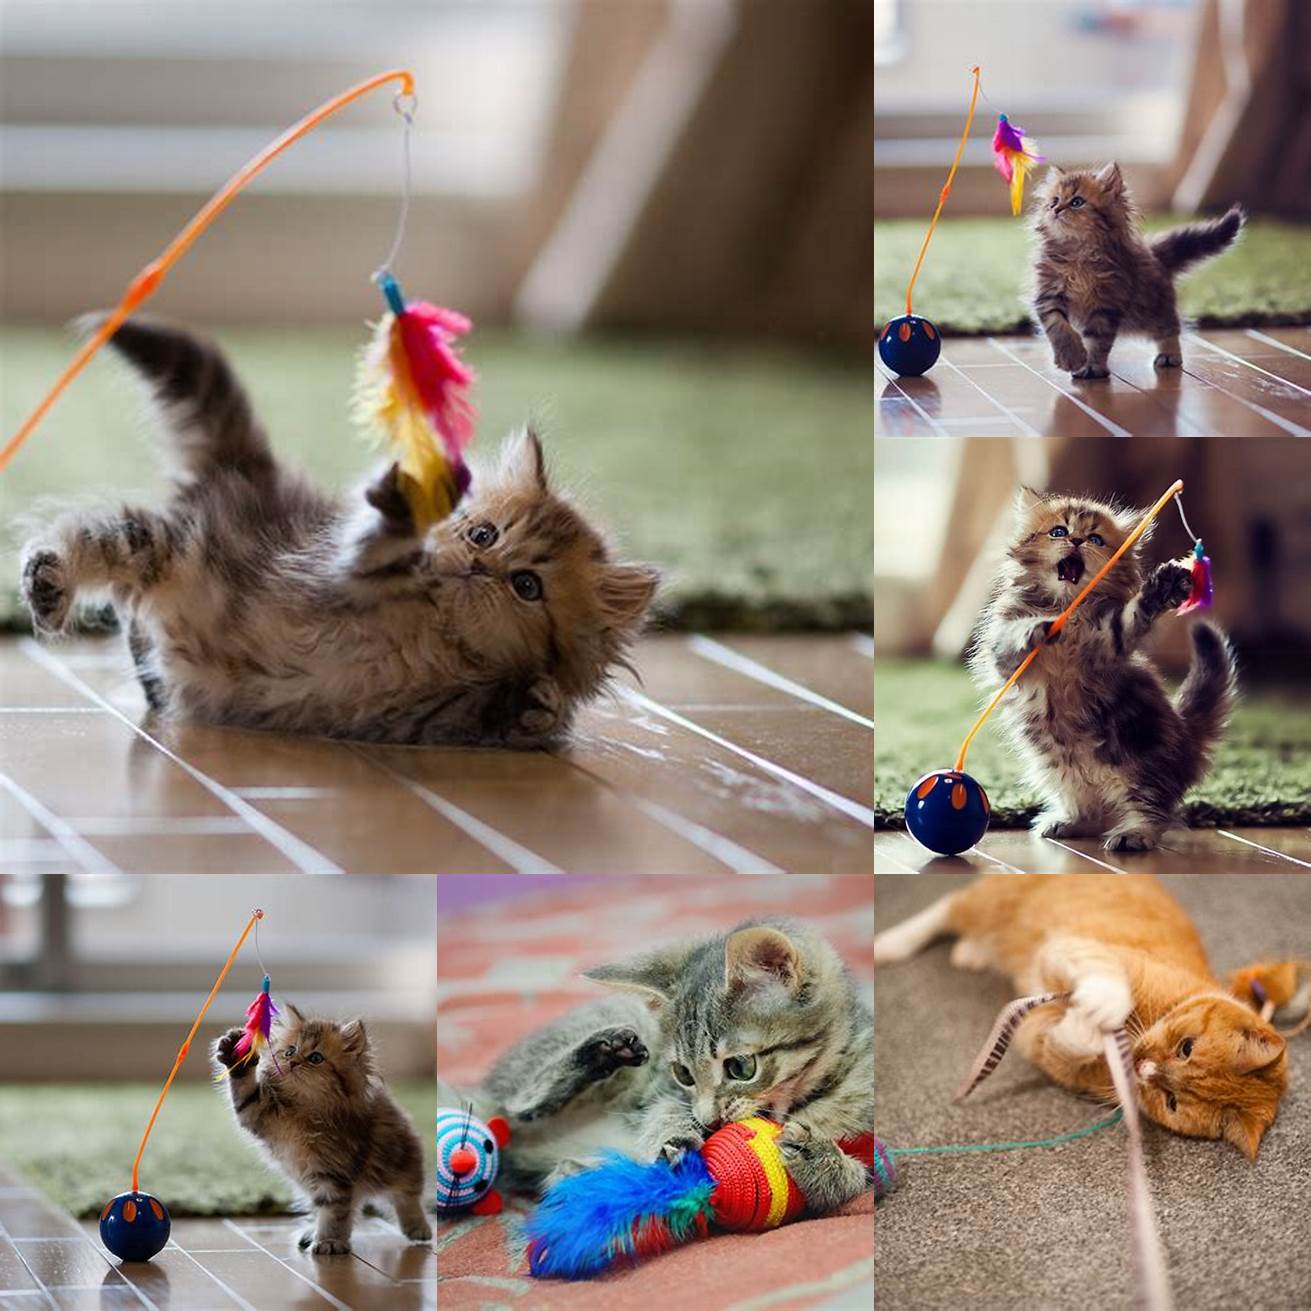 Image of a cat playing with a toy